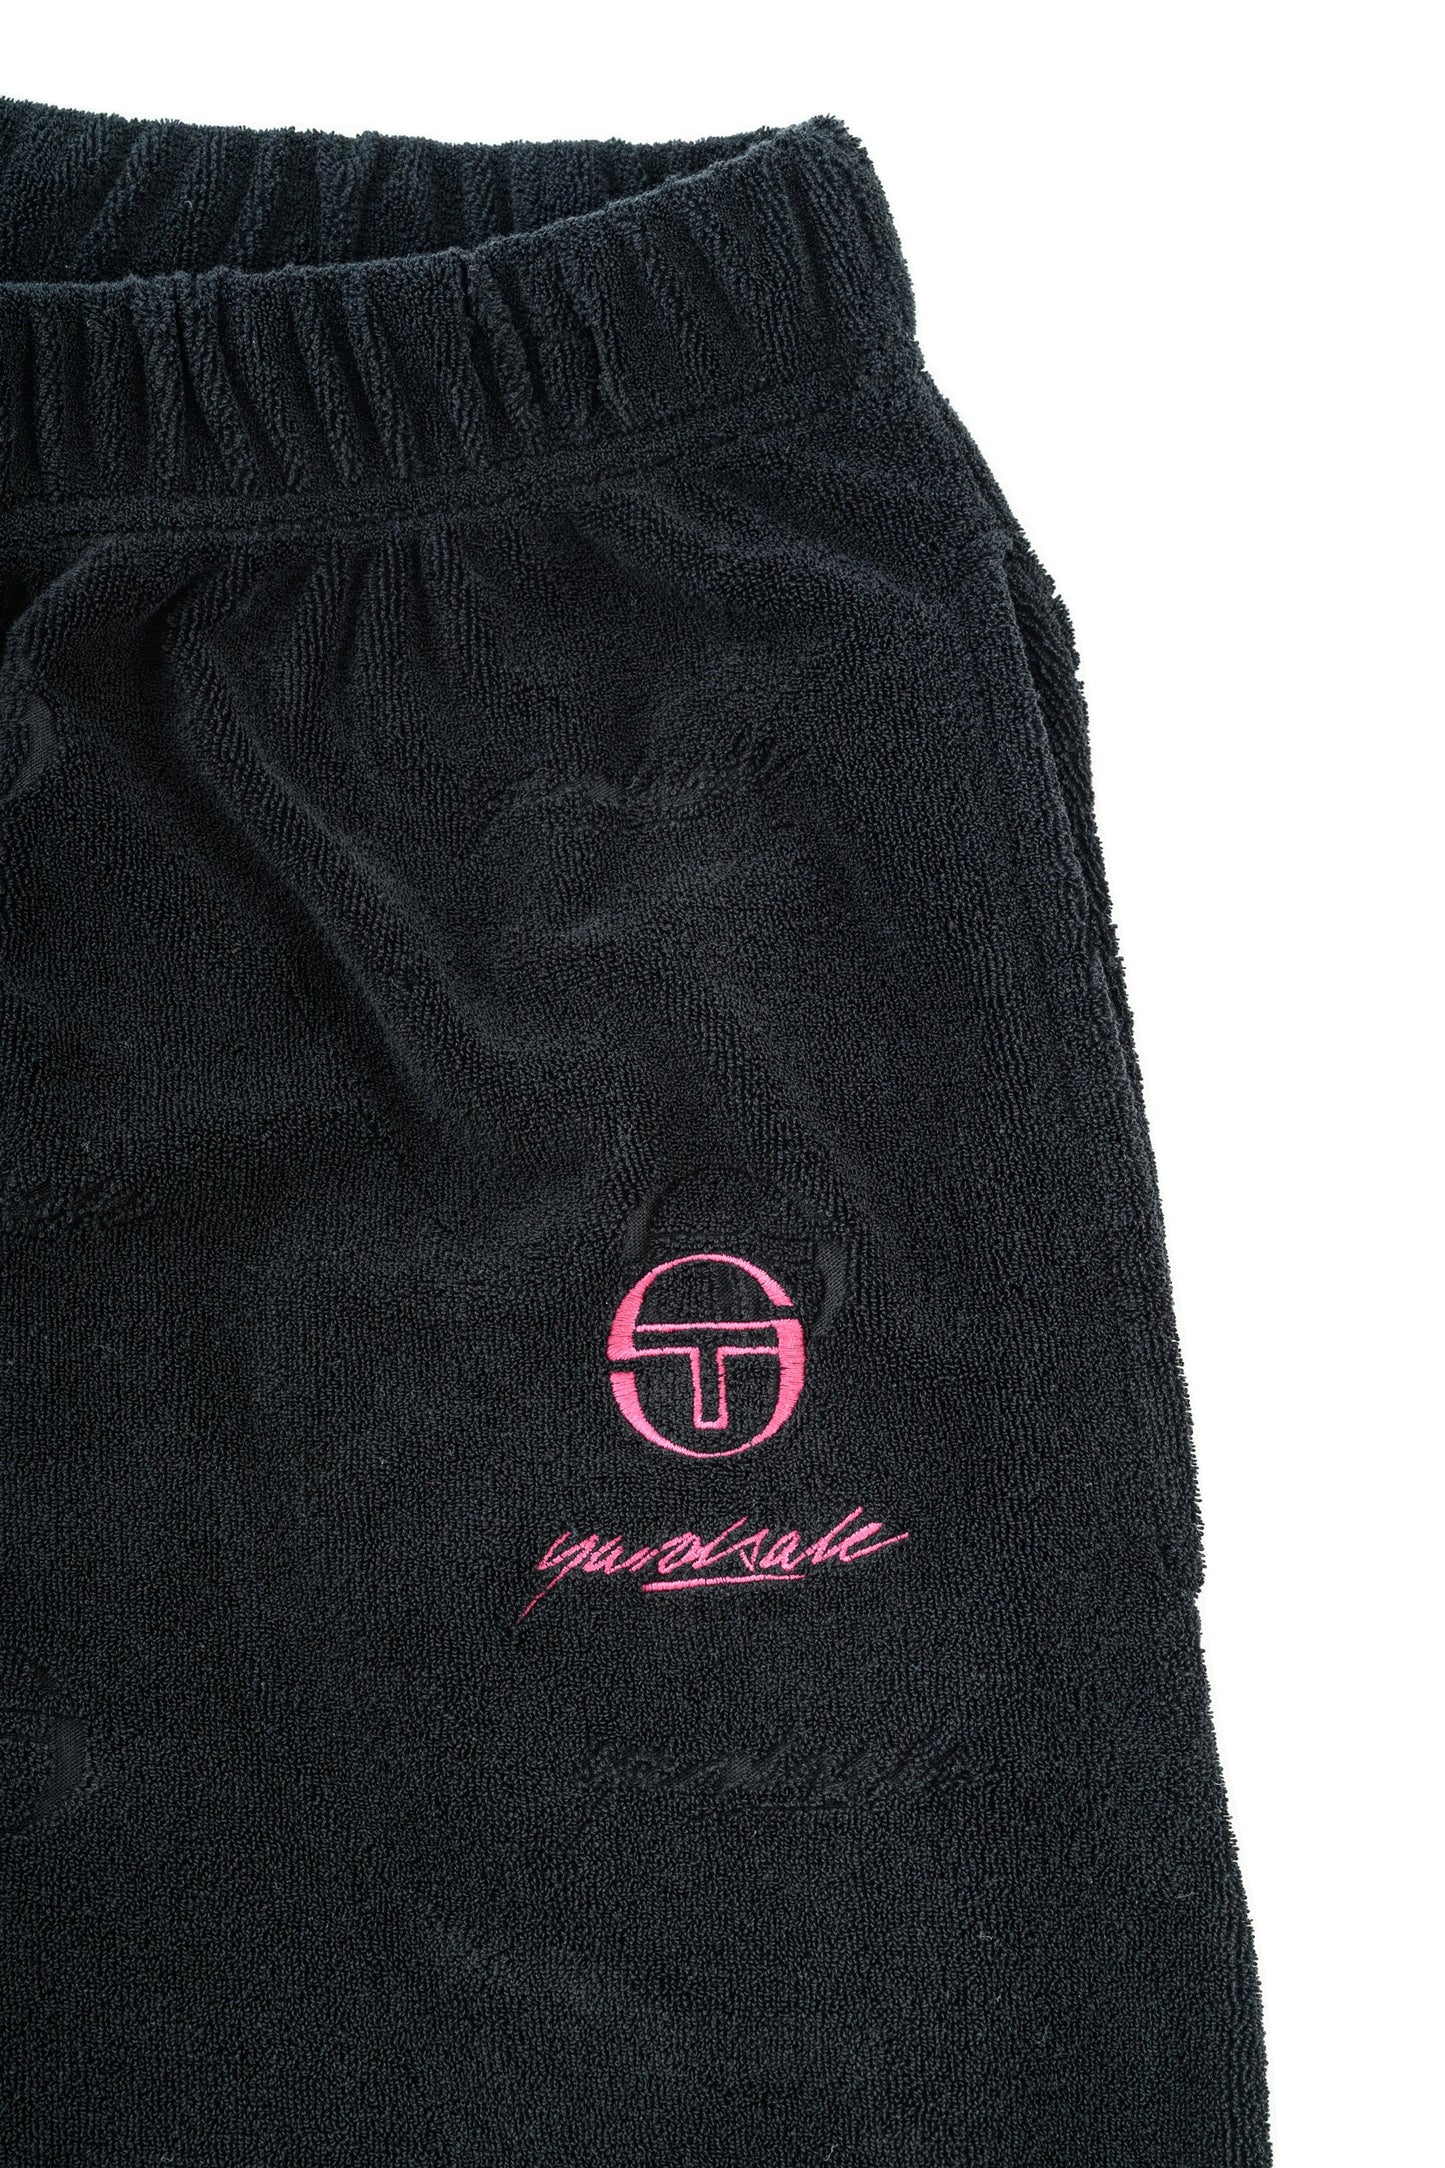 ST x YS TERRY TRACK BOTTOMS (BLACK)